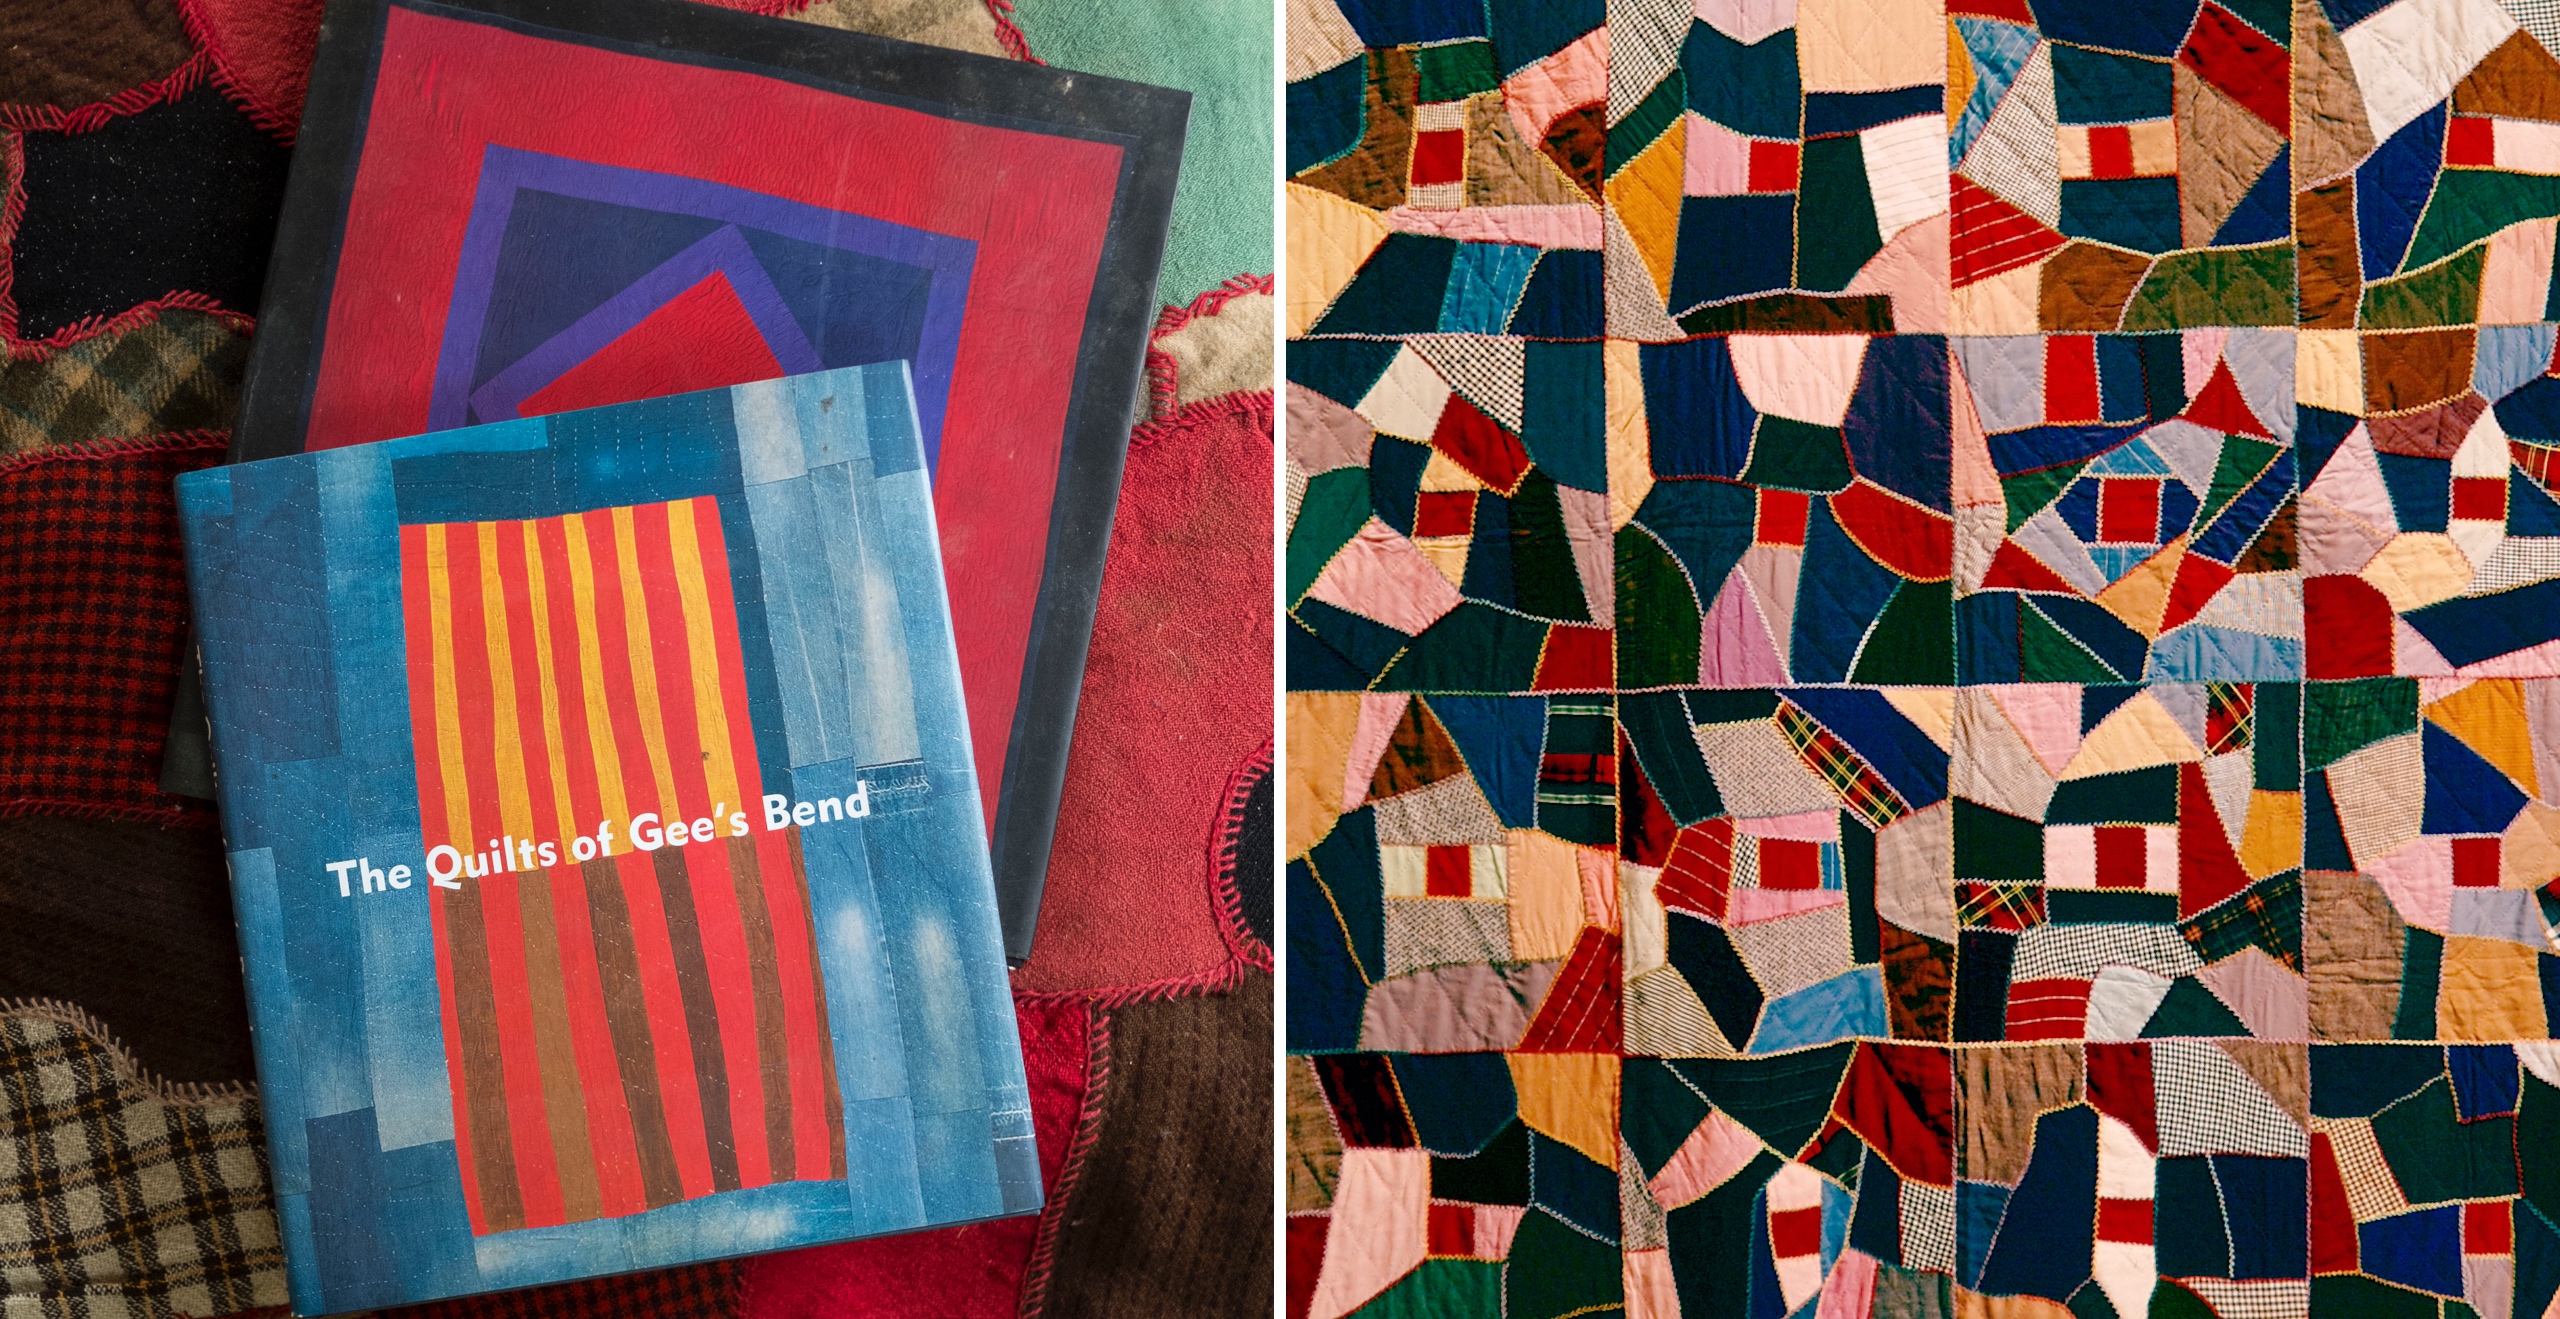 <em>Left to right:</em> Over time the humble patchwork quilt was celebrated as art featured in books and museum exhibitions. When textile patches were stitched together haphazardly they were known as “crazy” quilts